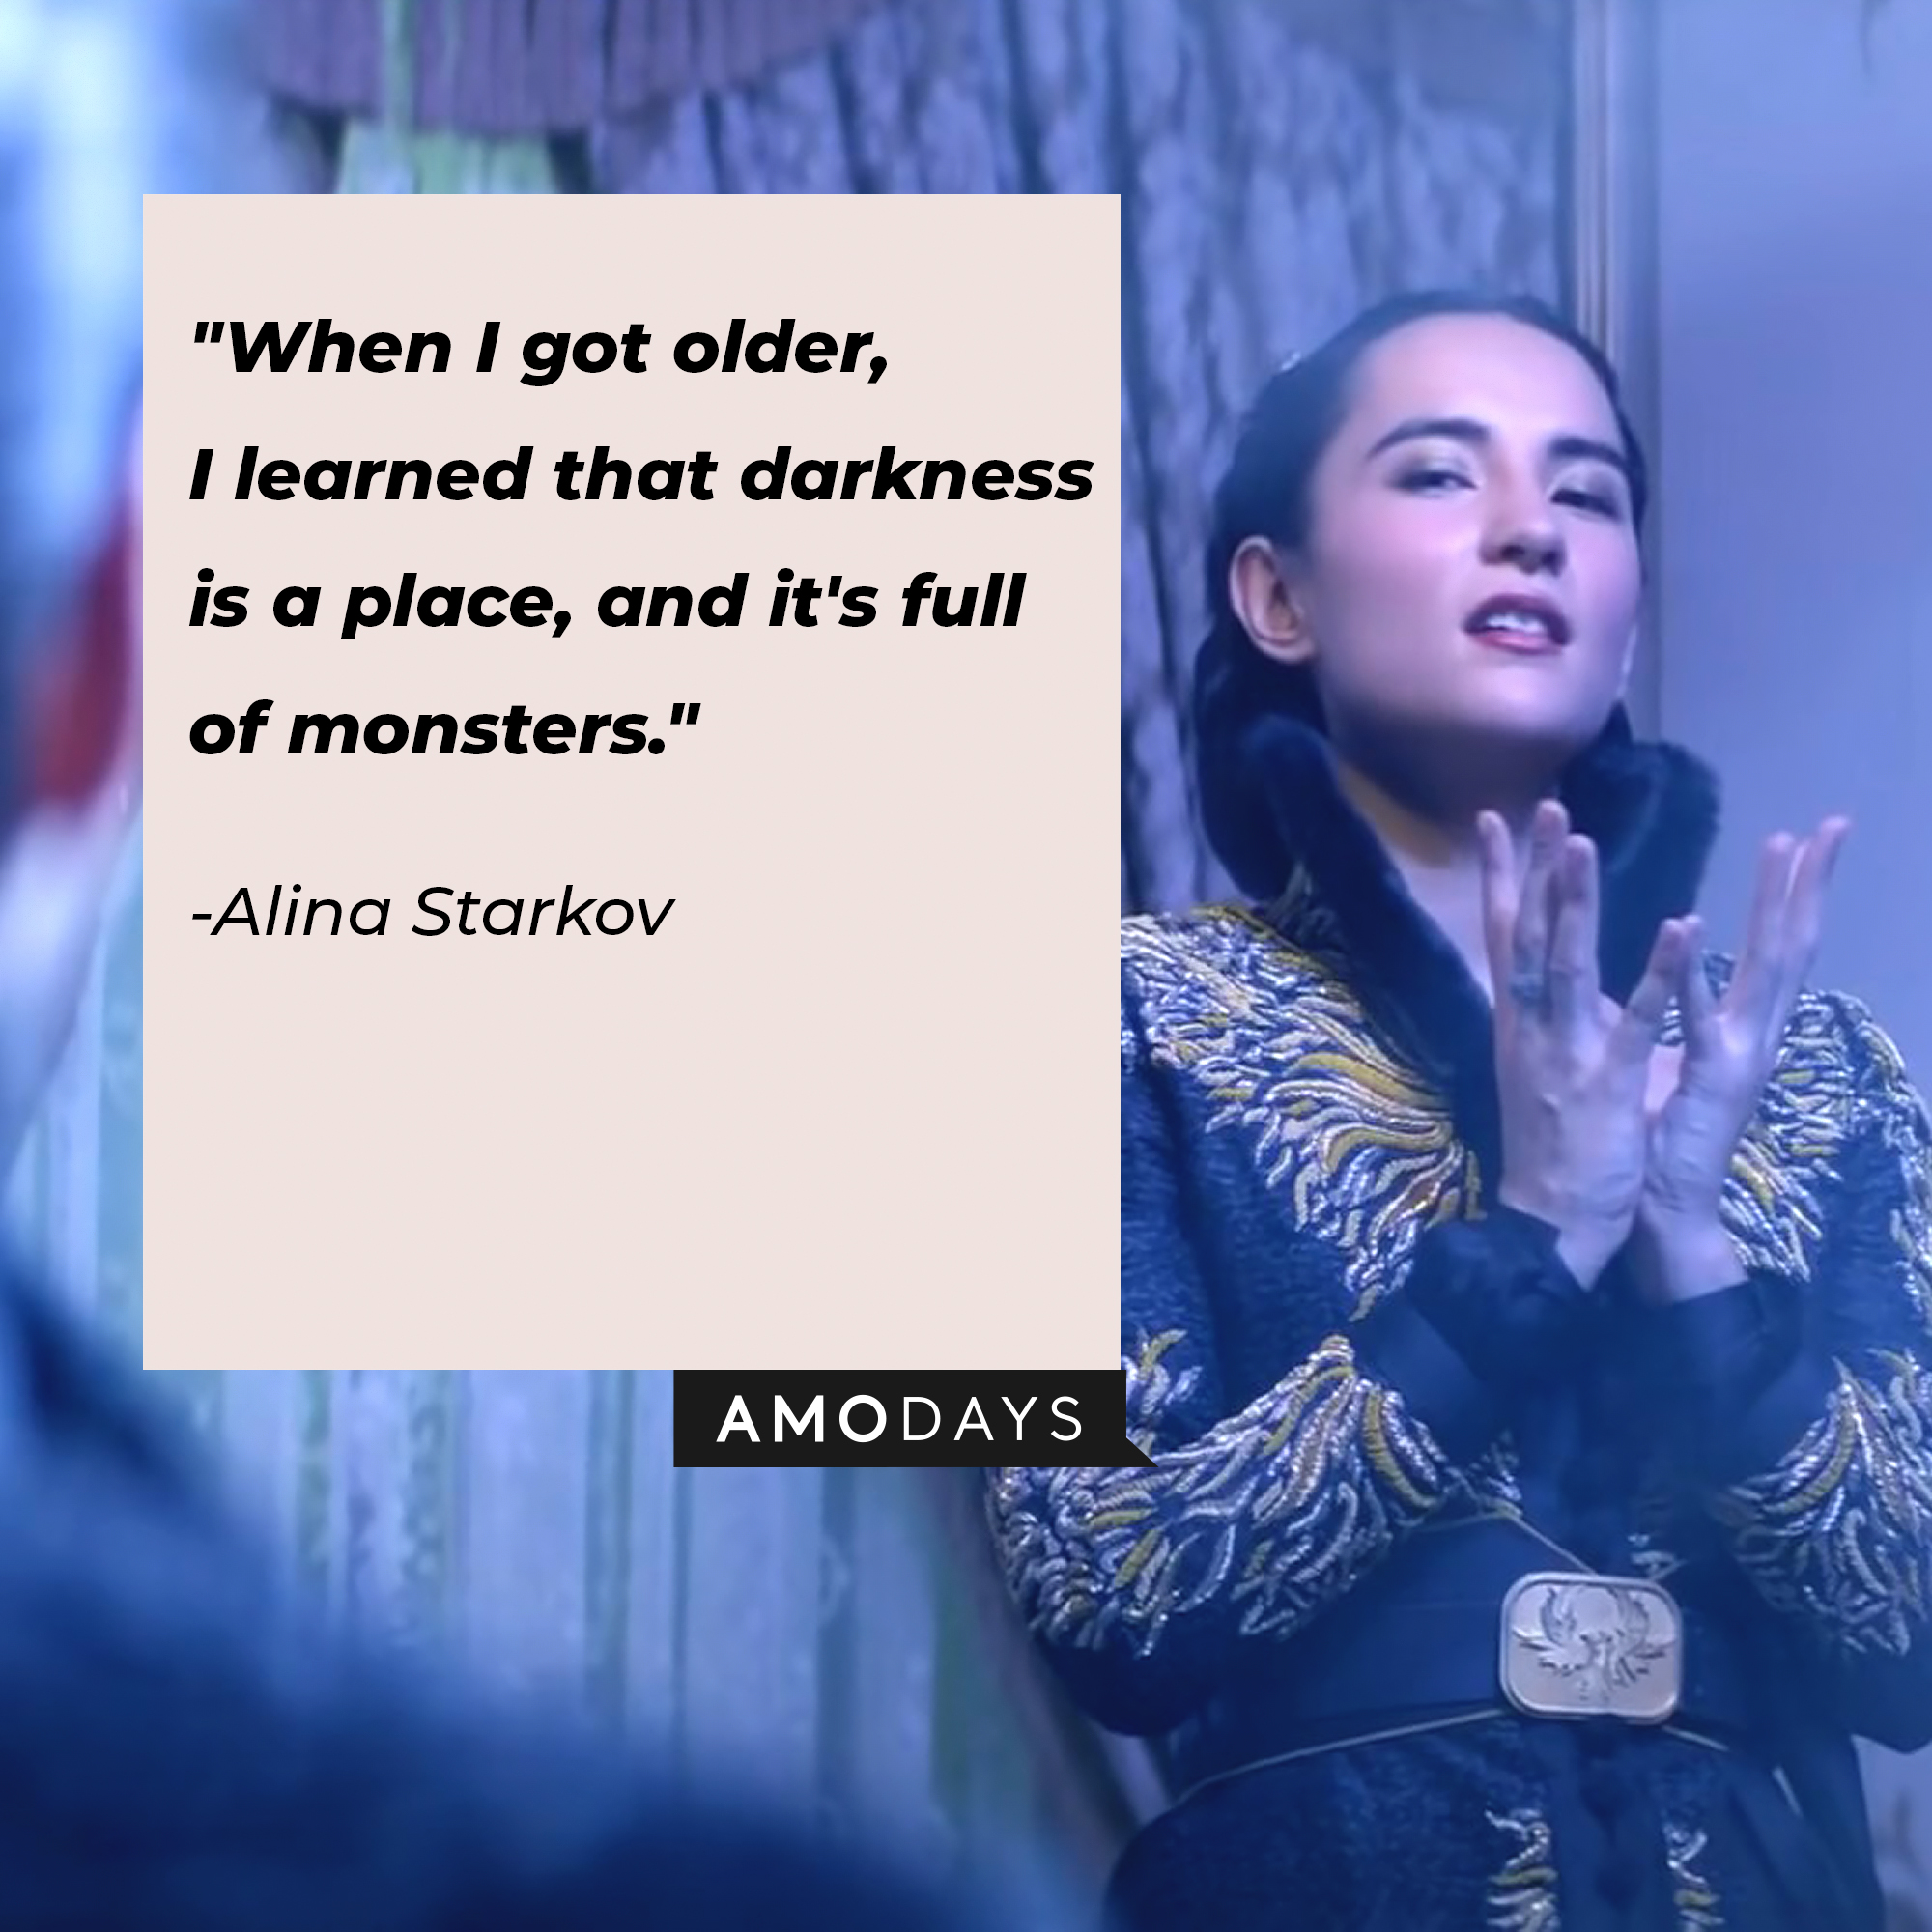 Alina Starkov's quote: "When I got older, I learned that darkness is a place, and it's full of monsters." | Image: AmoDays